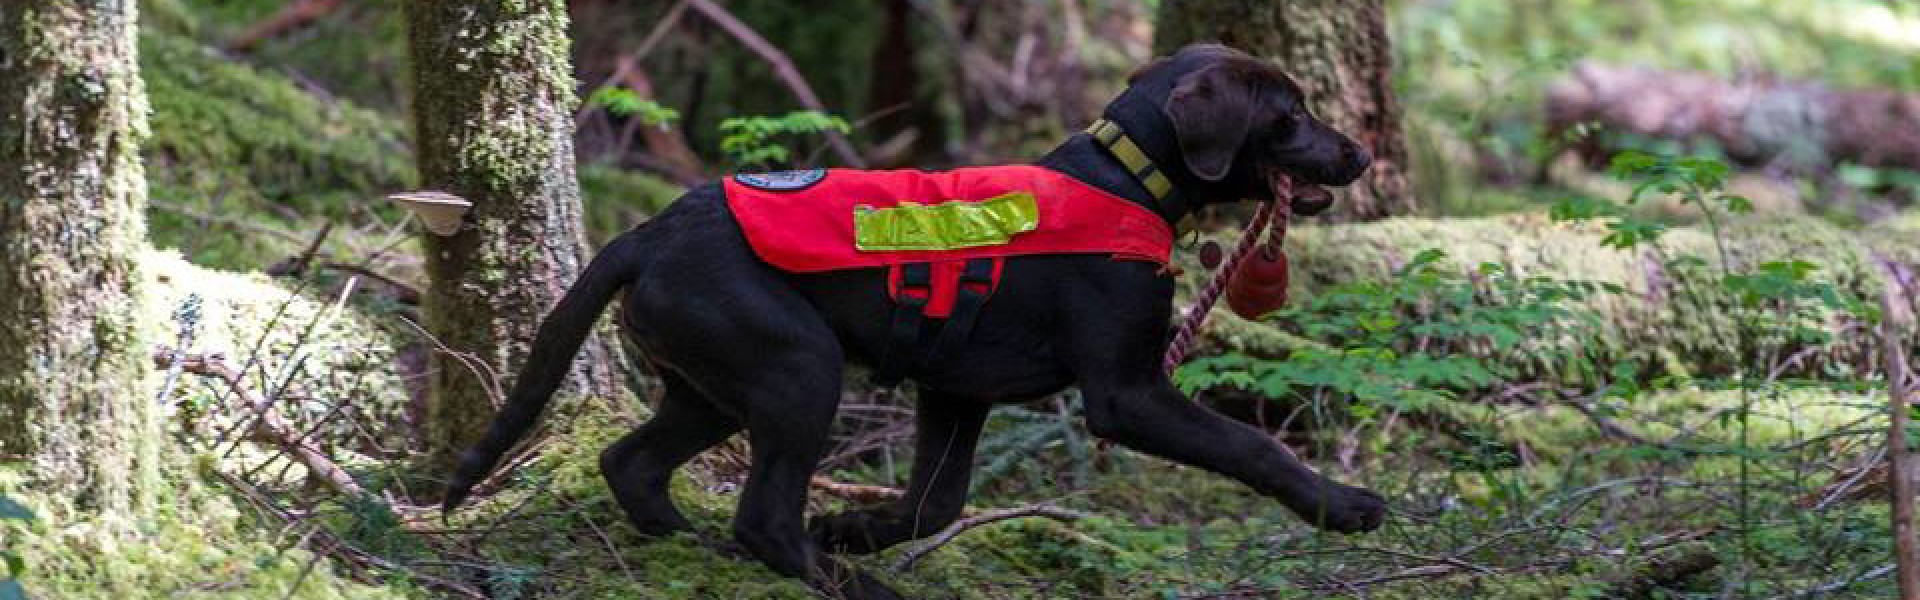 King County Search Dogs